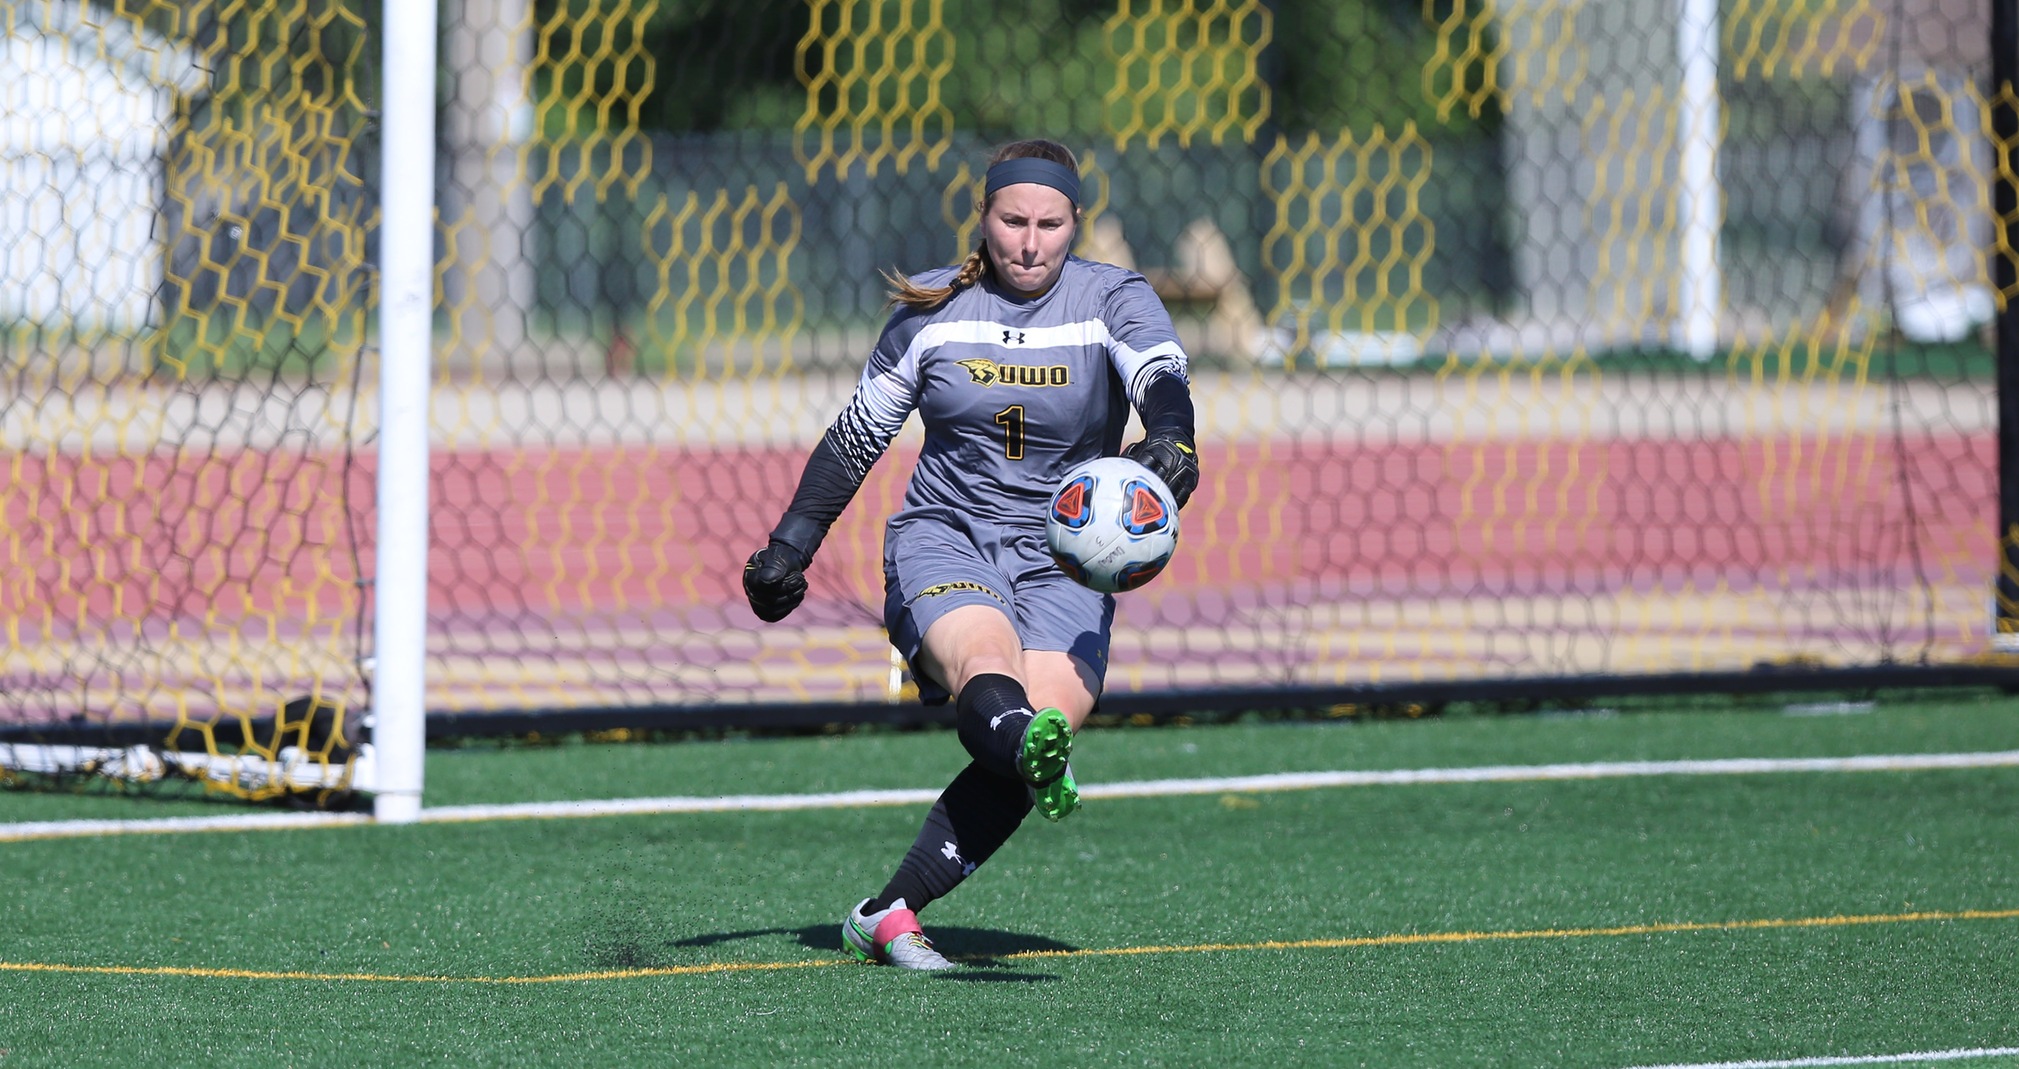 Madelyn Runyan recorded two saves in each half against the Comets.